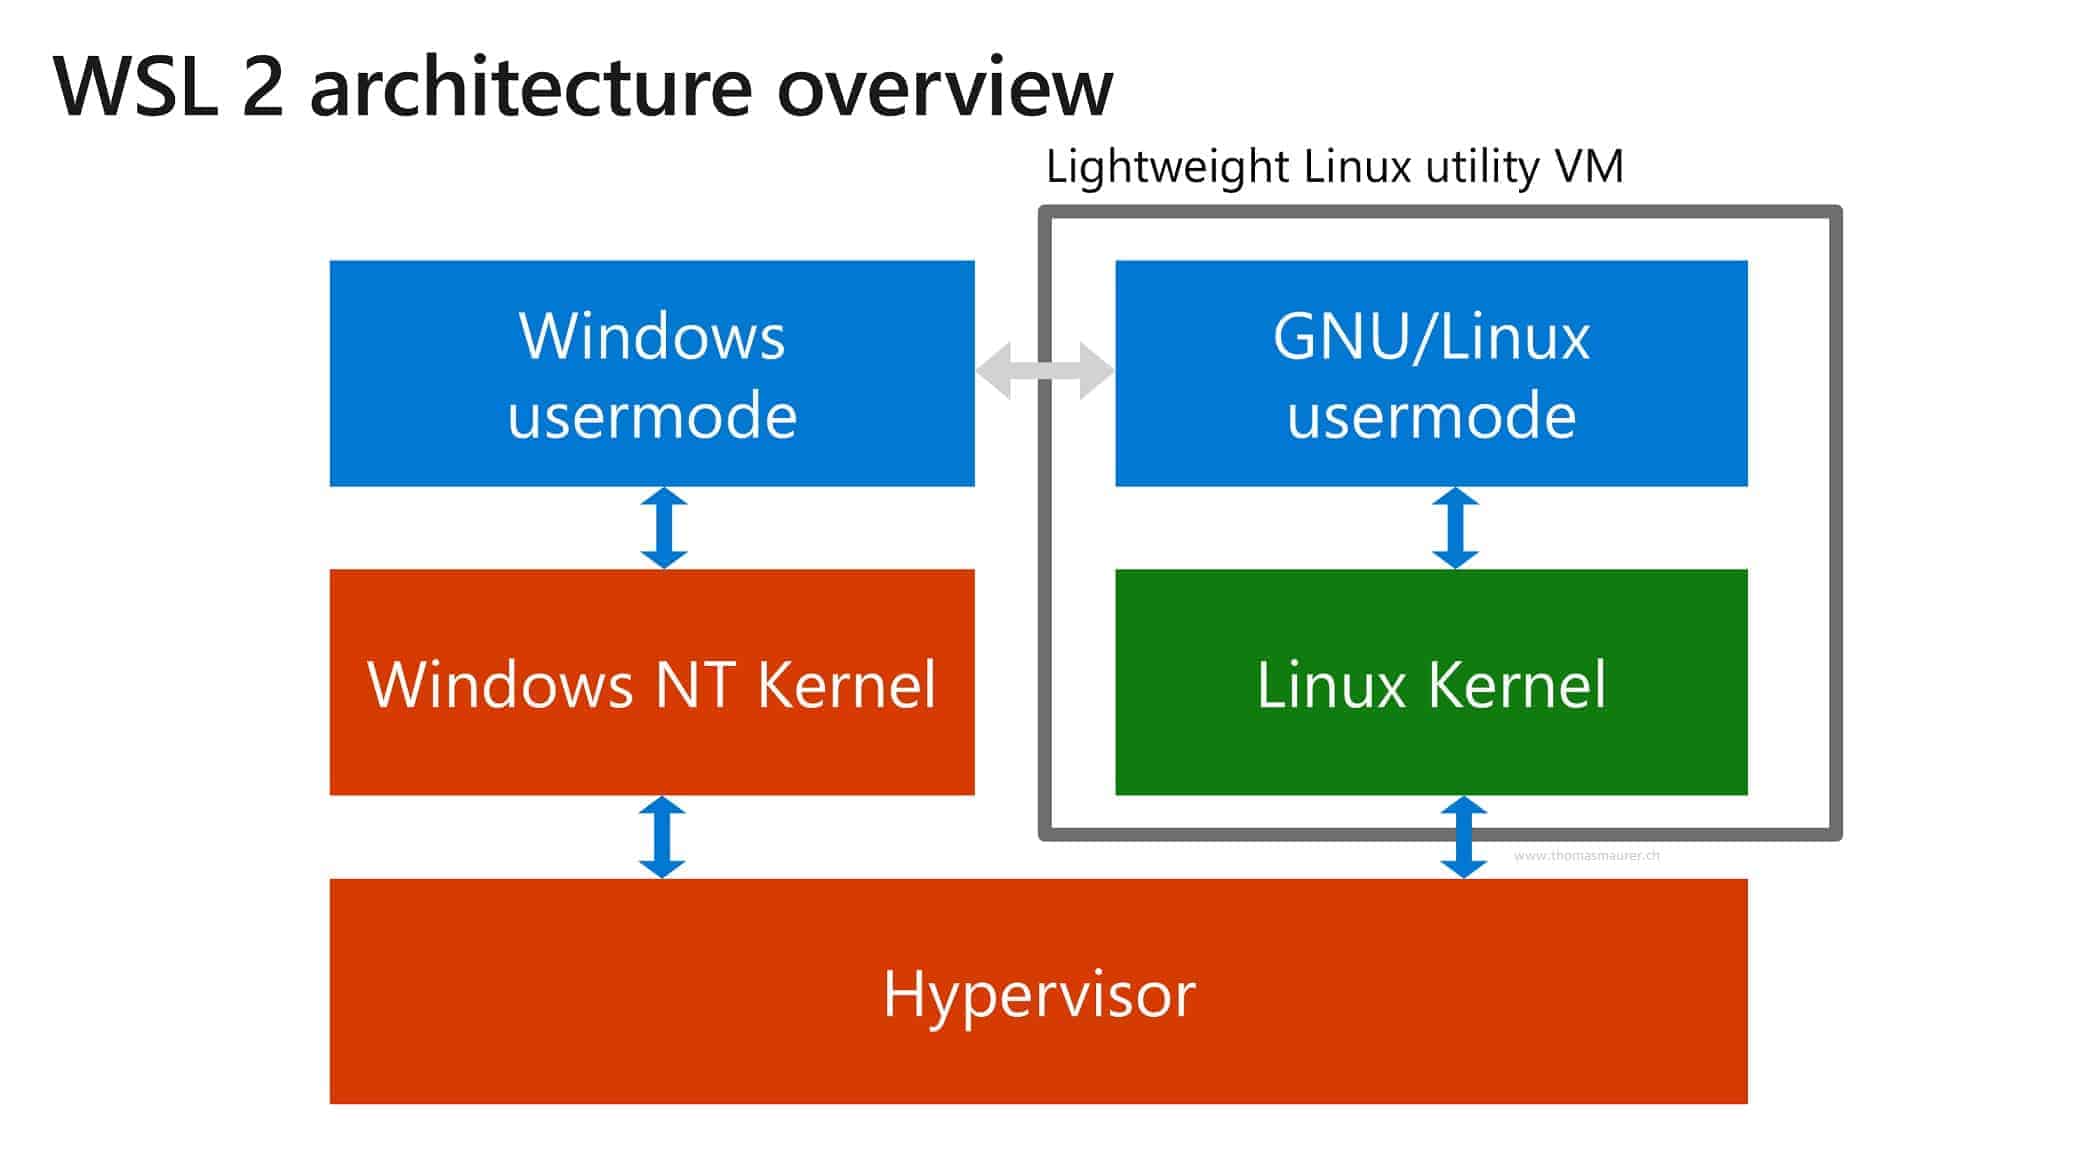 WSL2 architecture overview